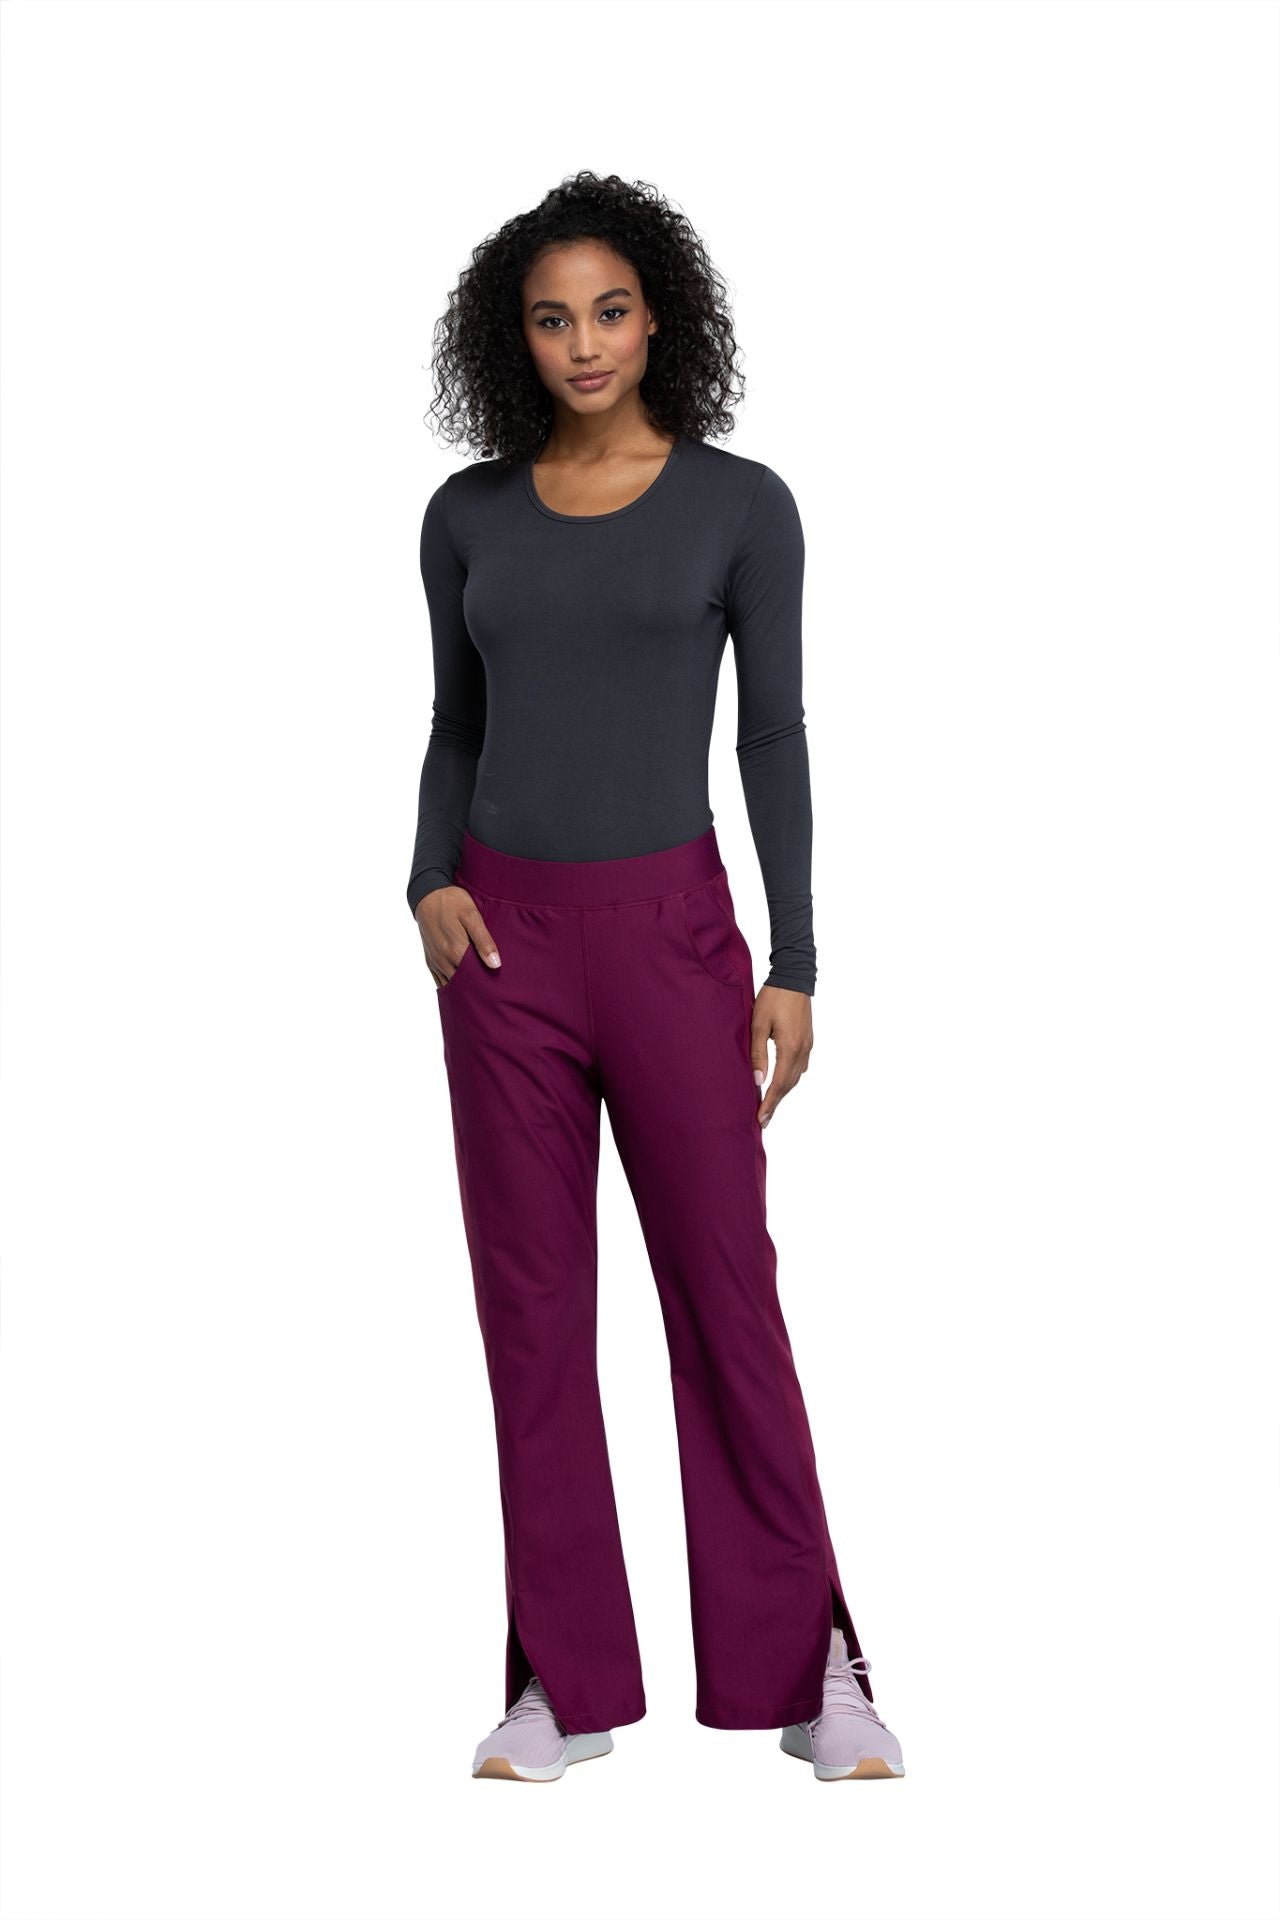 Cherokee Form CK091 Tall Mid-Rise Pull-On Pant